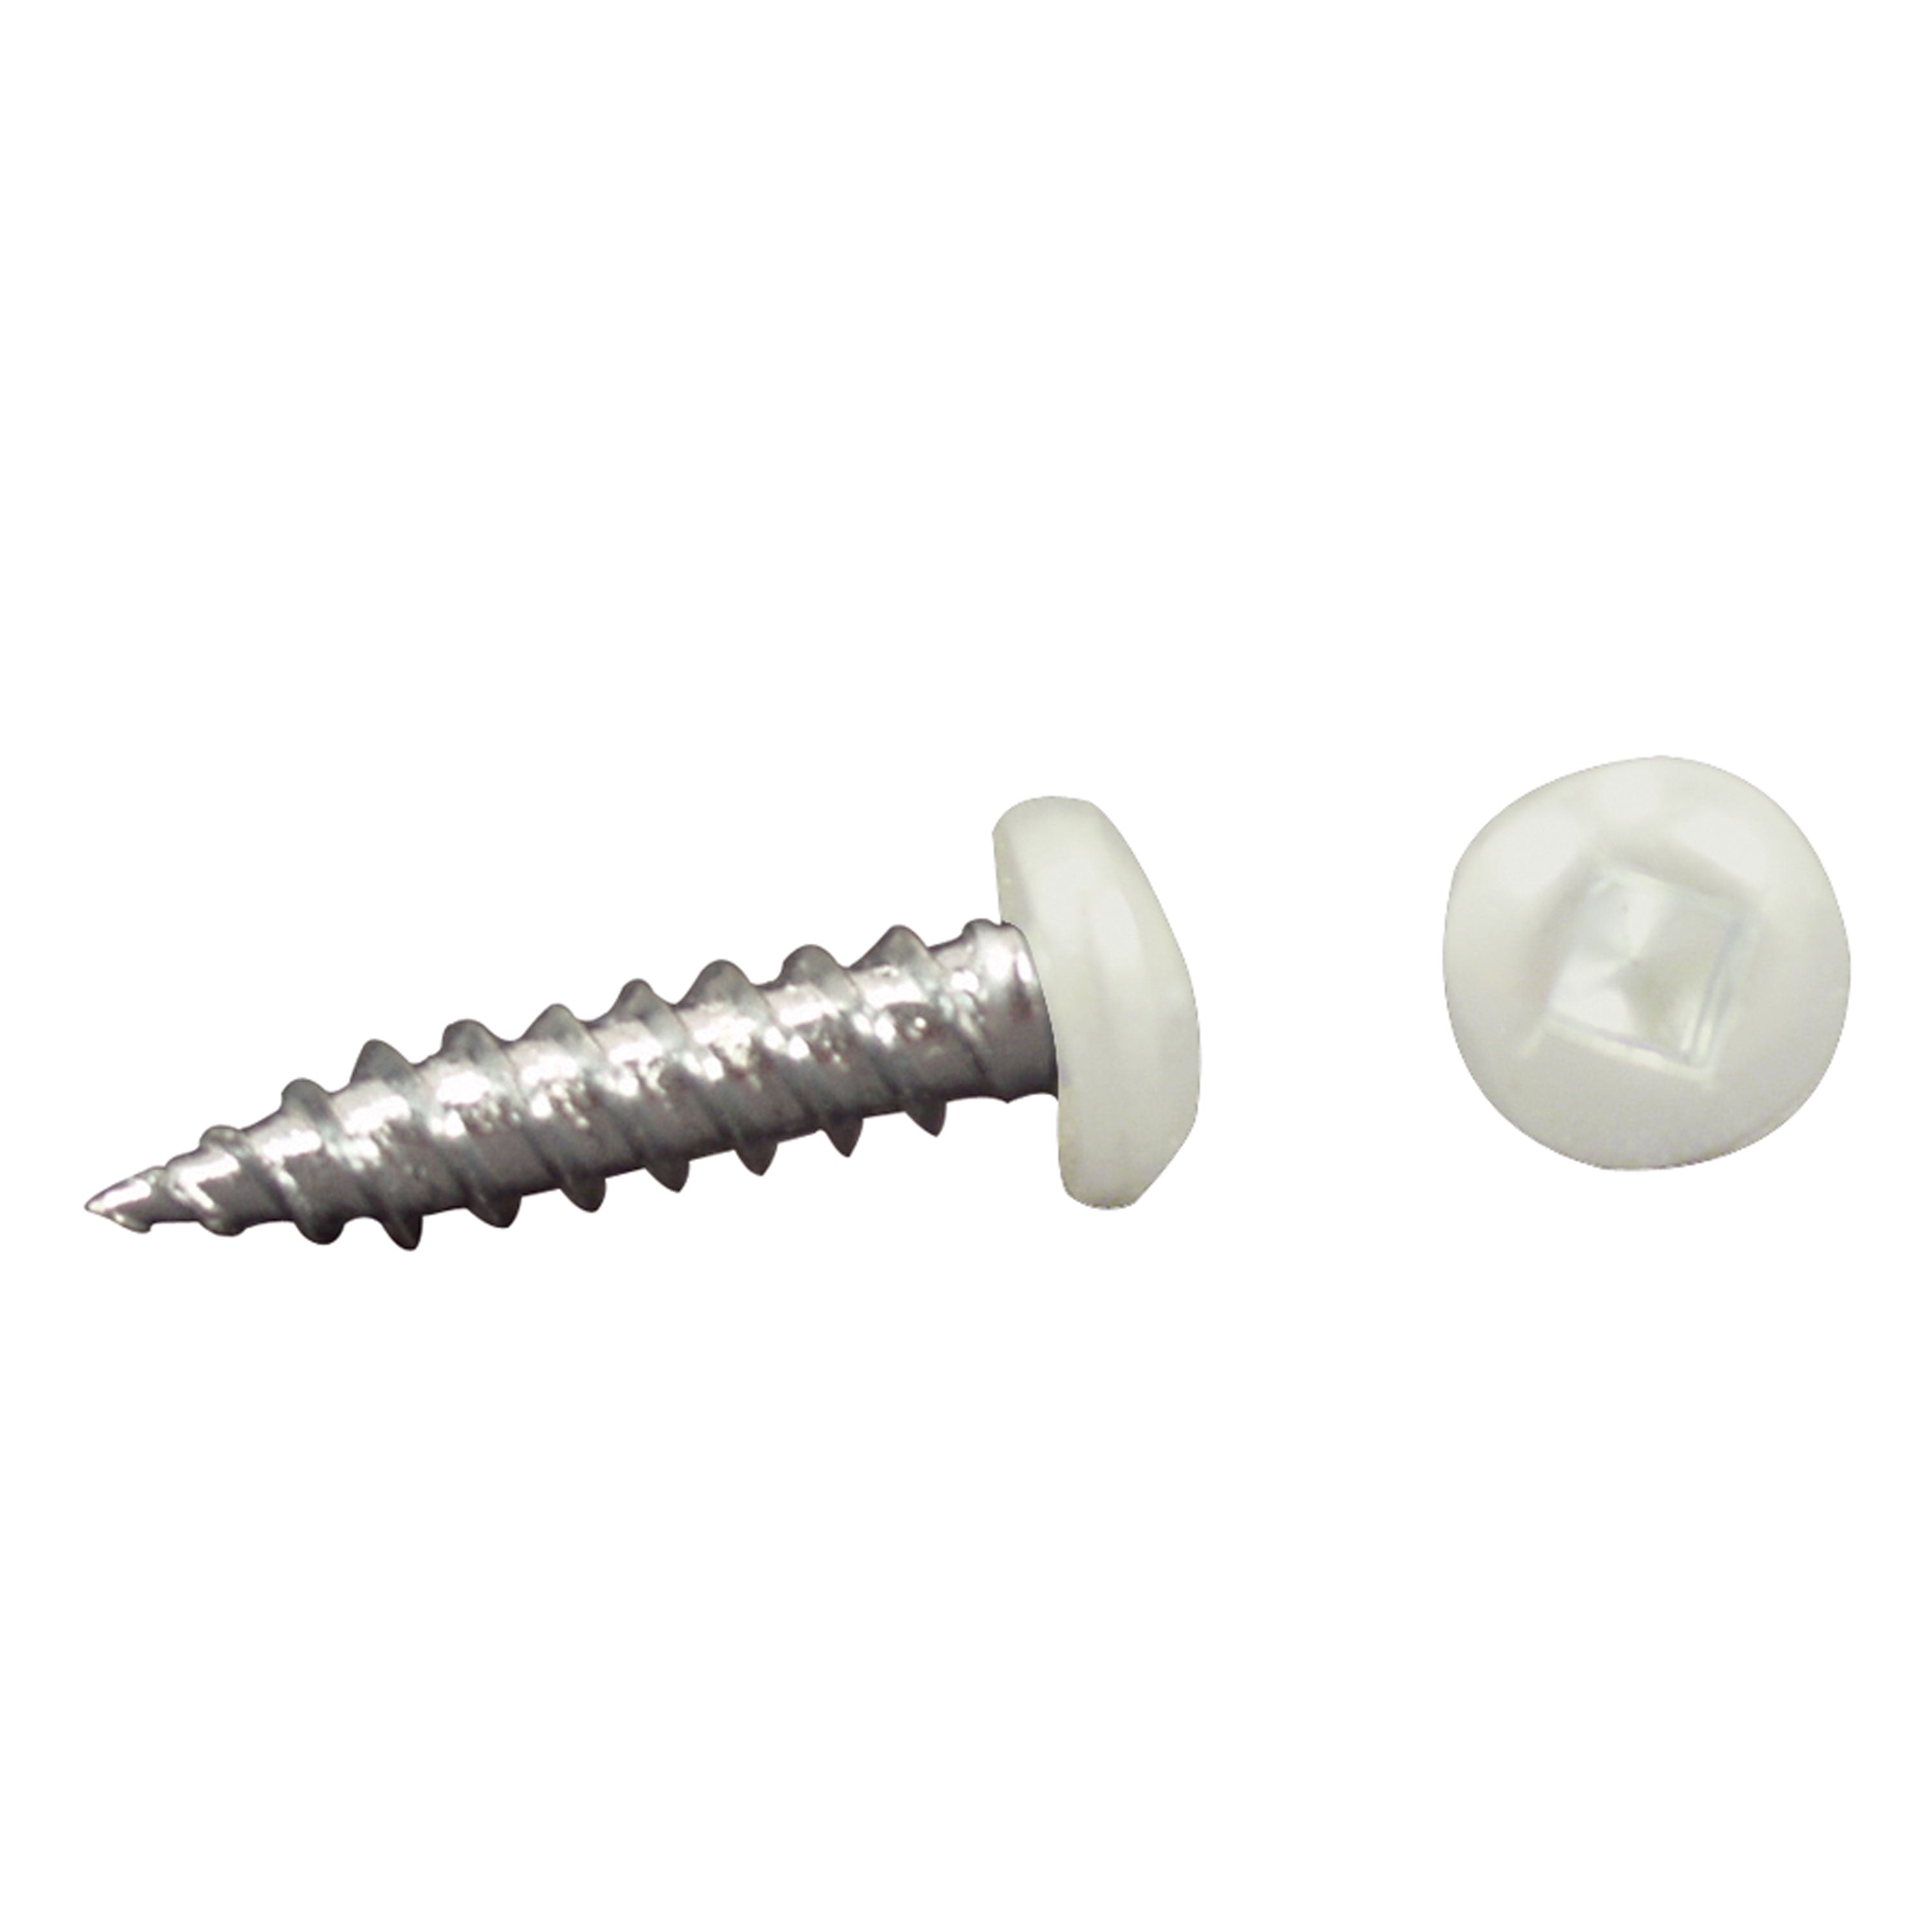 AP Products 012-PSQ500 W 8 X 1-1/4 Pan Head Square Recess Screw - #8 x 1.25", White, Pack of 500